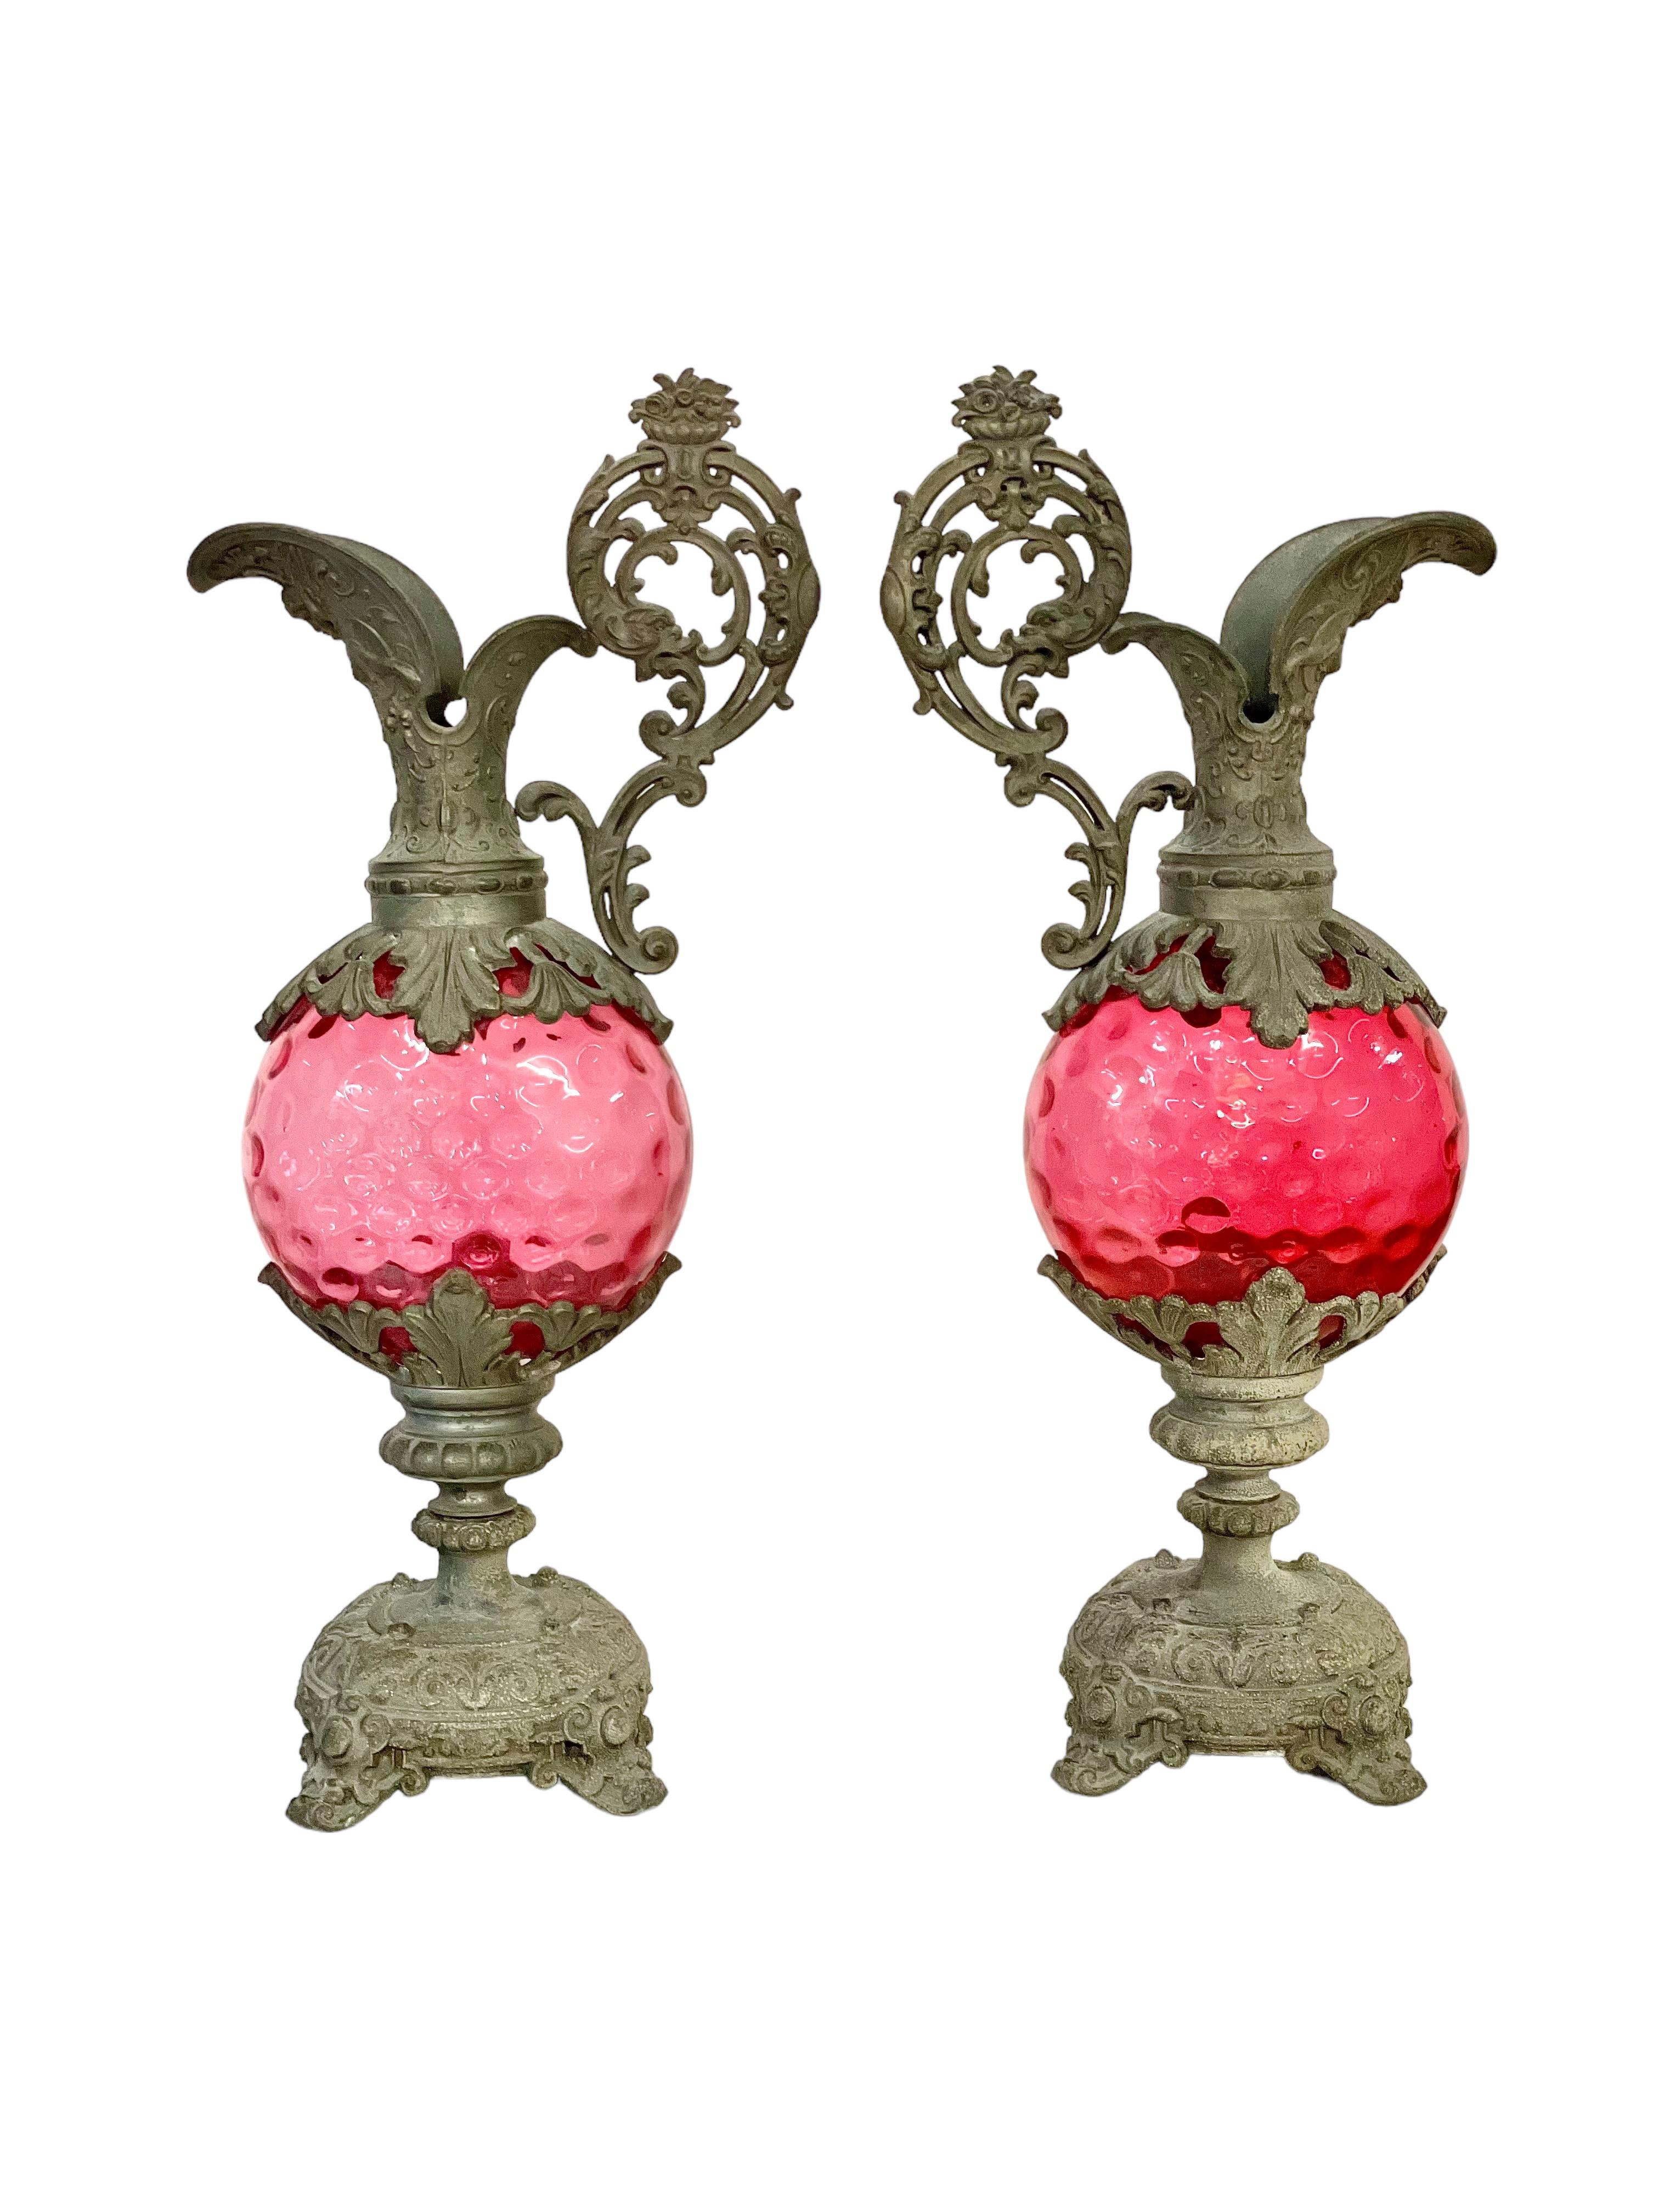 Napoleon III 19th Century French Pair of Tall Silver Plated Ewers with Pink Glass  For Sale